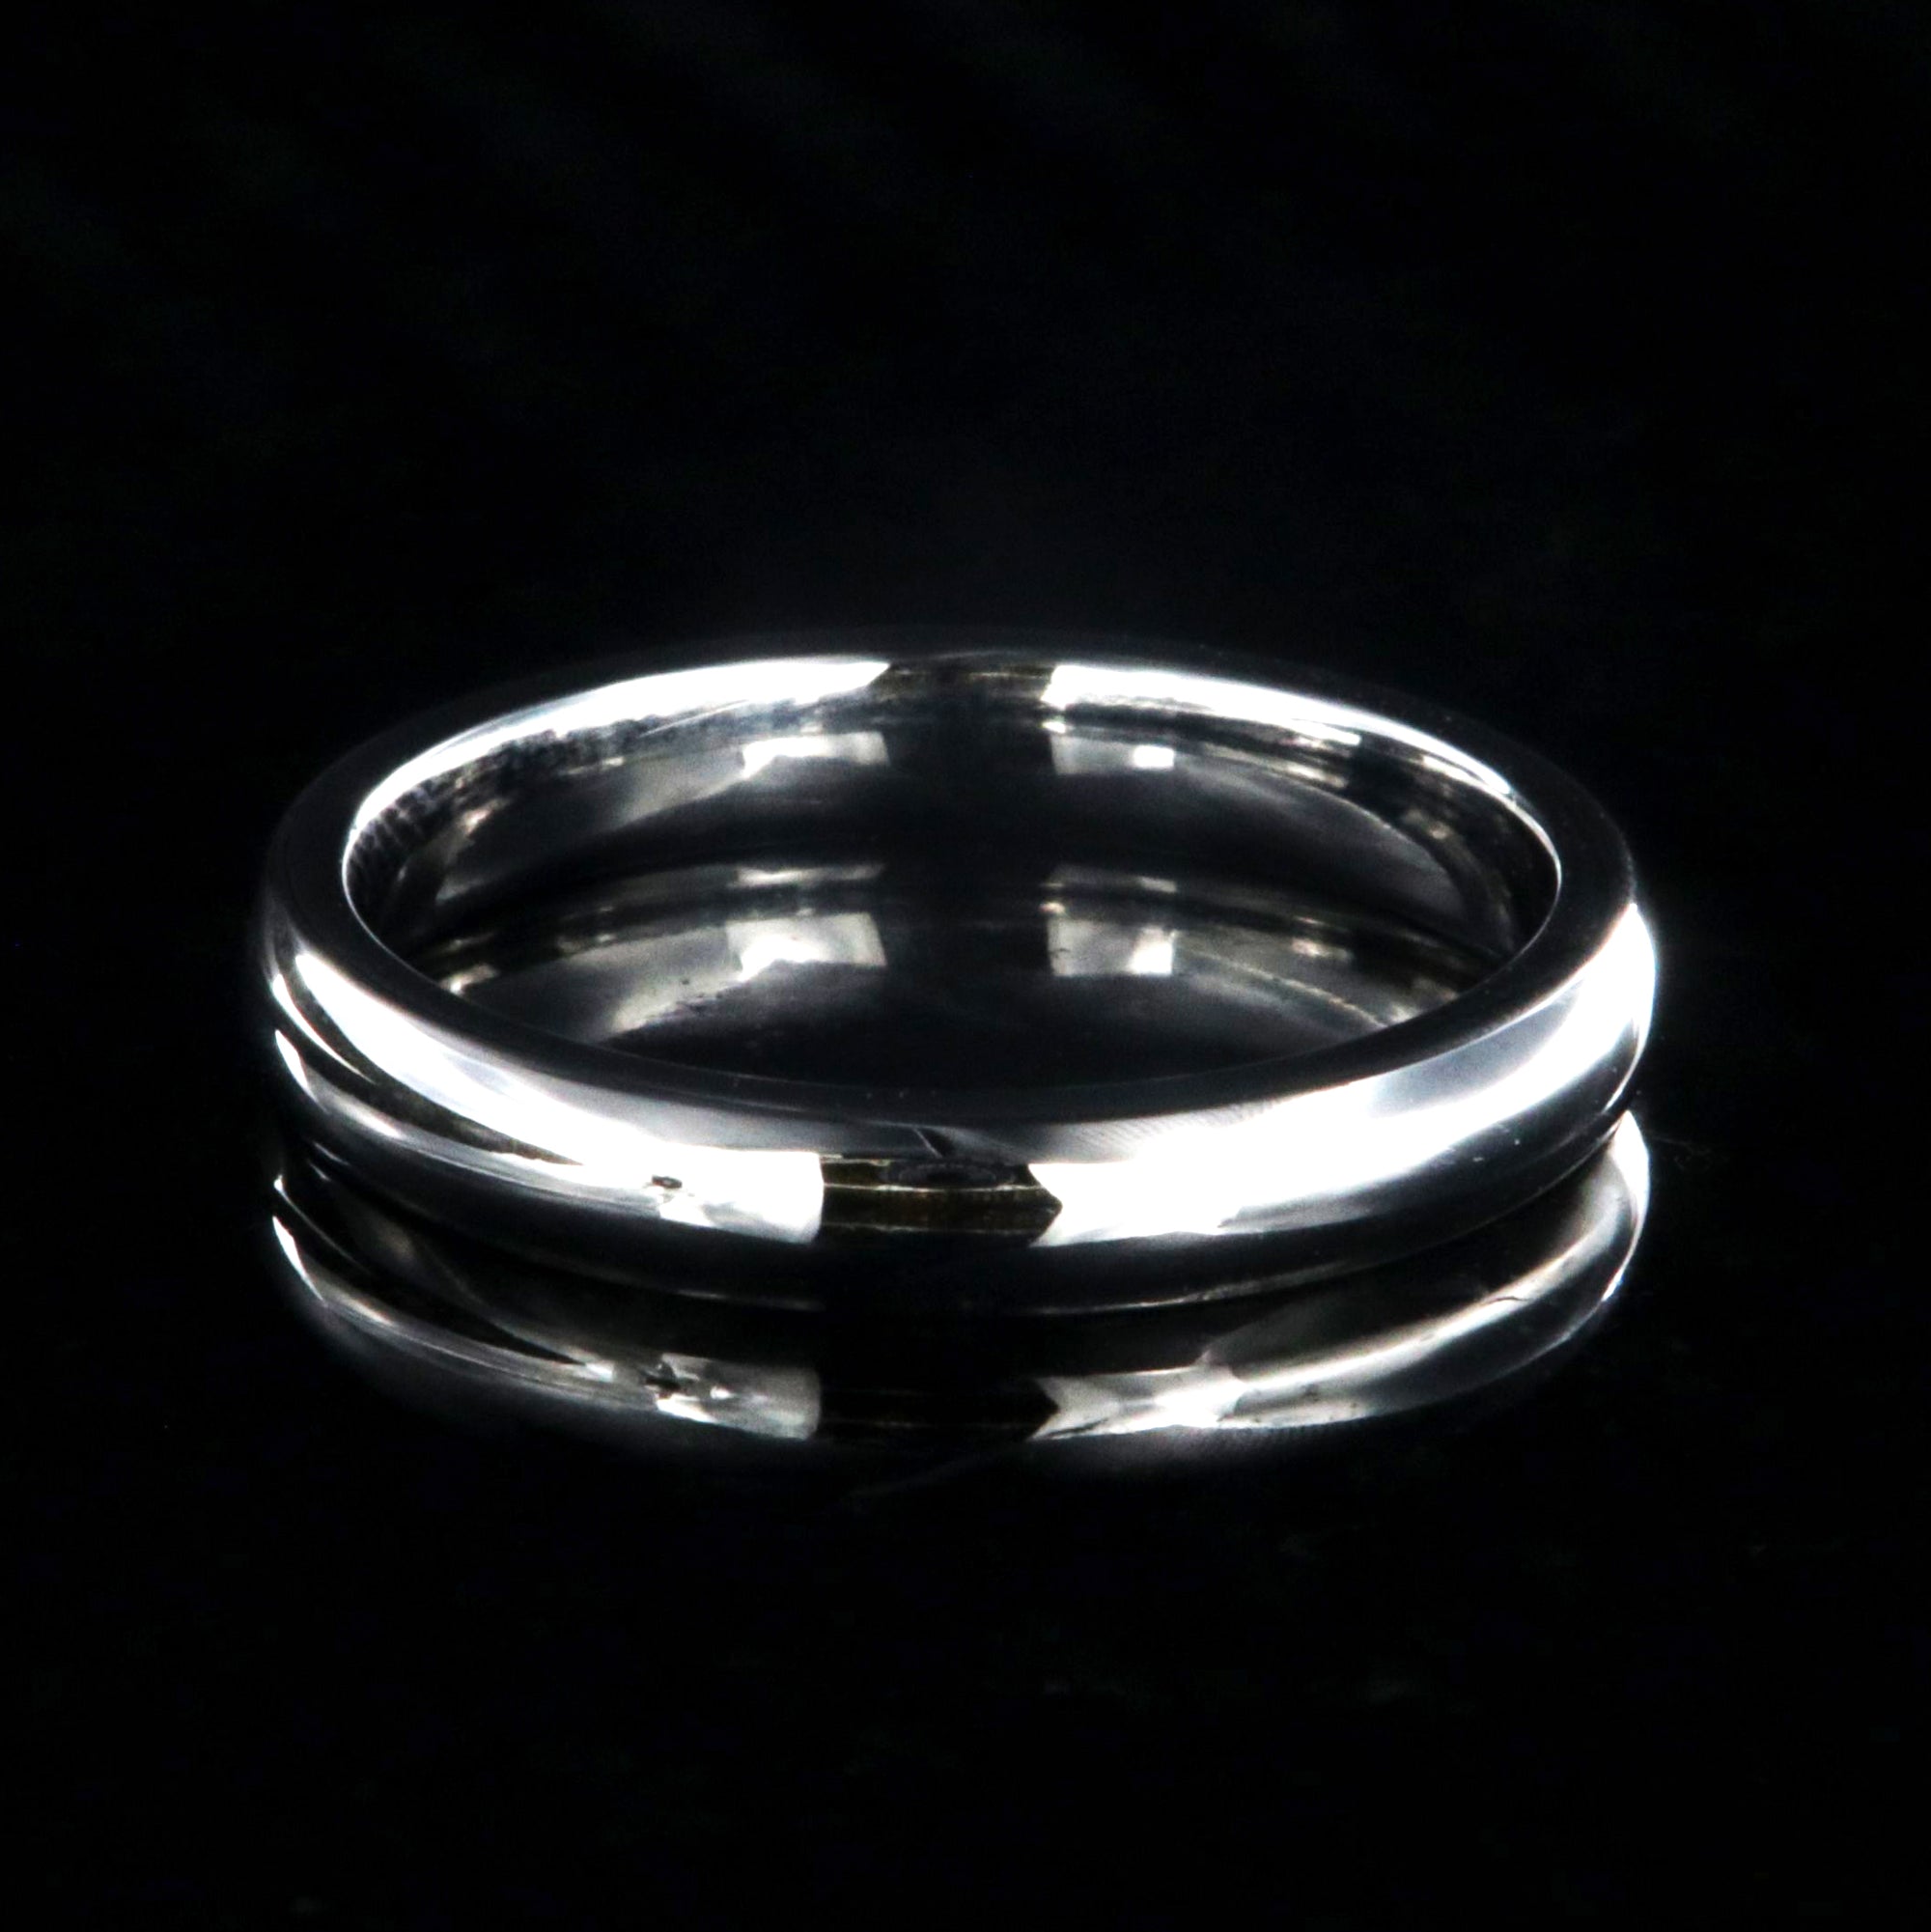 3mm wide cobalt wedding band with a polished finish and rounded profile